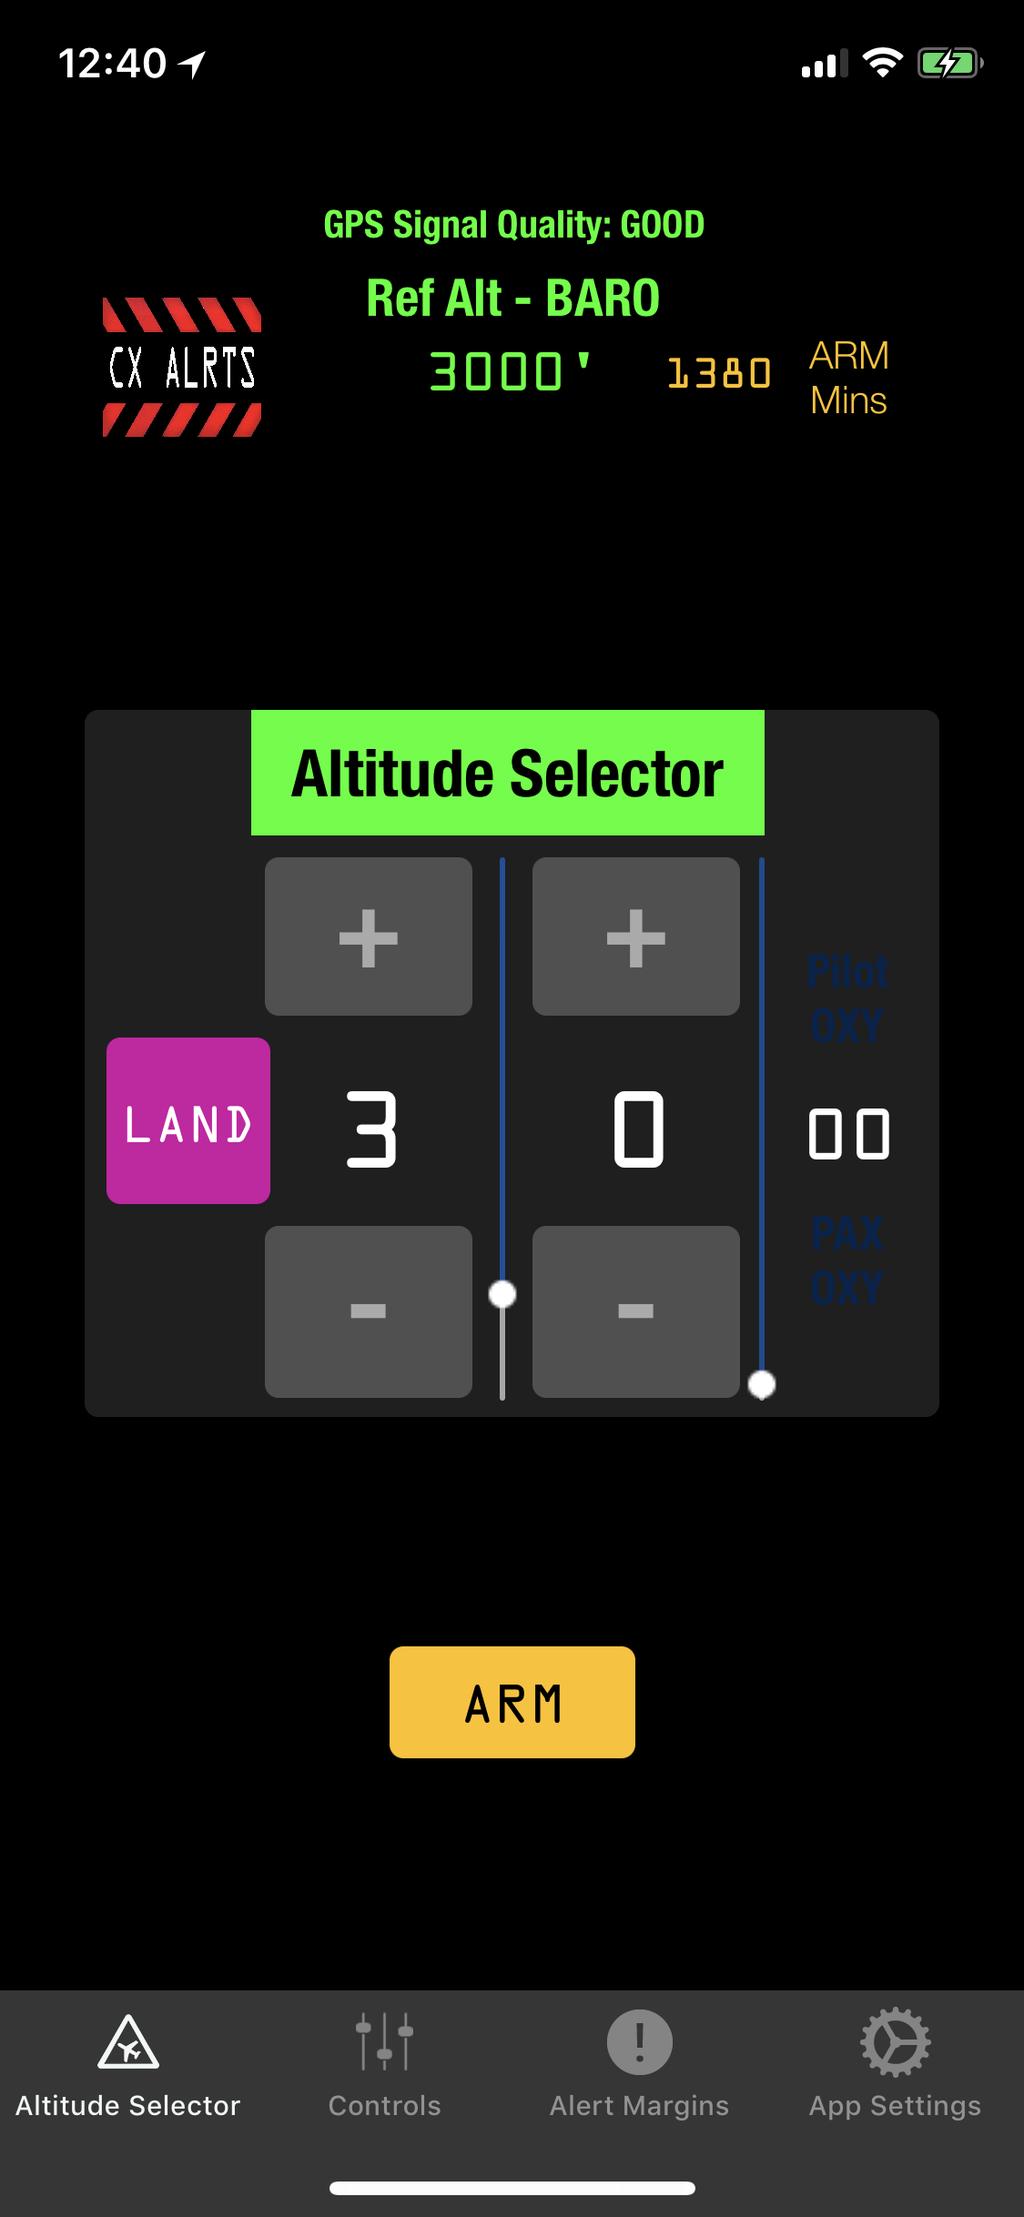 Once armed, standard altitude alerts function normally. However, CHK ALT alerts are inhibited. Landing Mode is automatically selected at 1000 AGL (based on the Field Elevation setting).